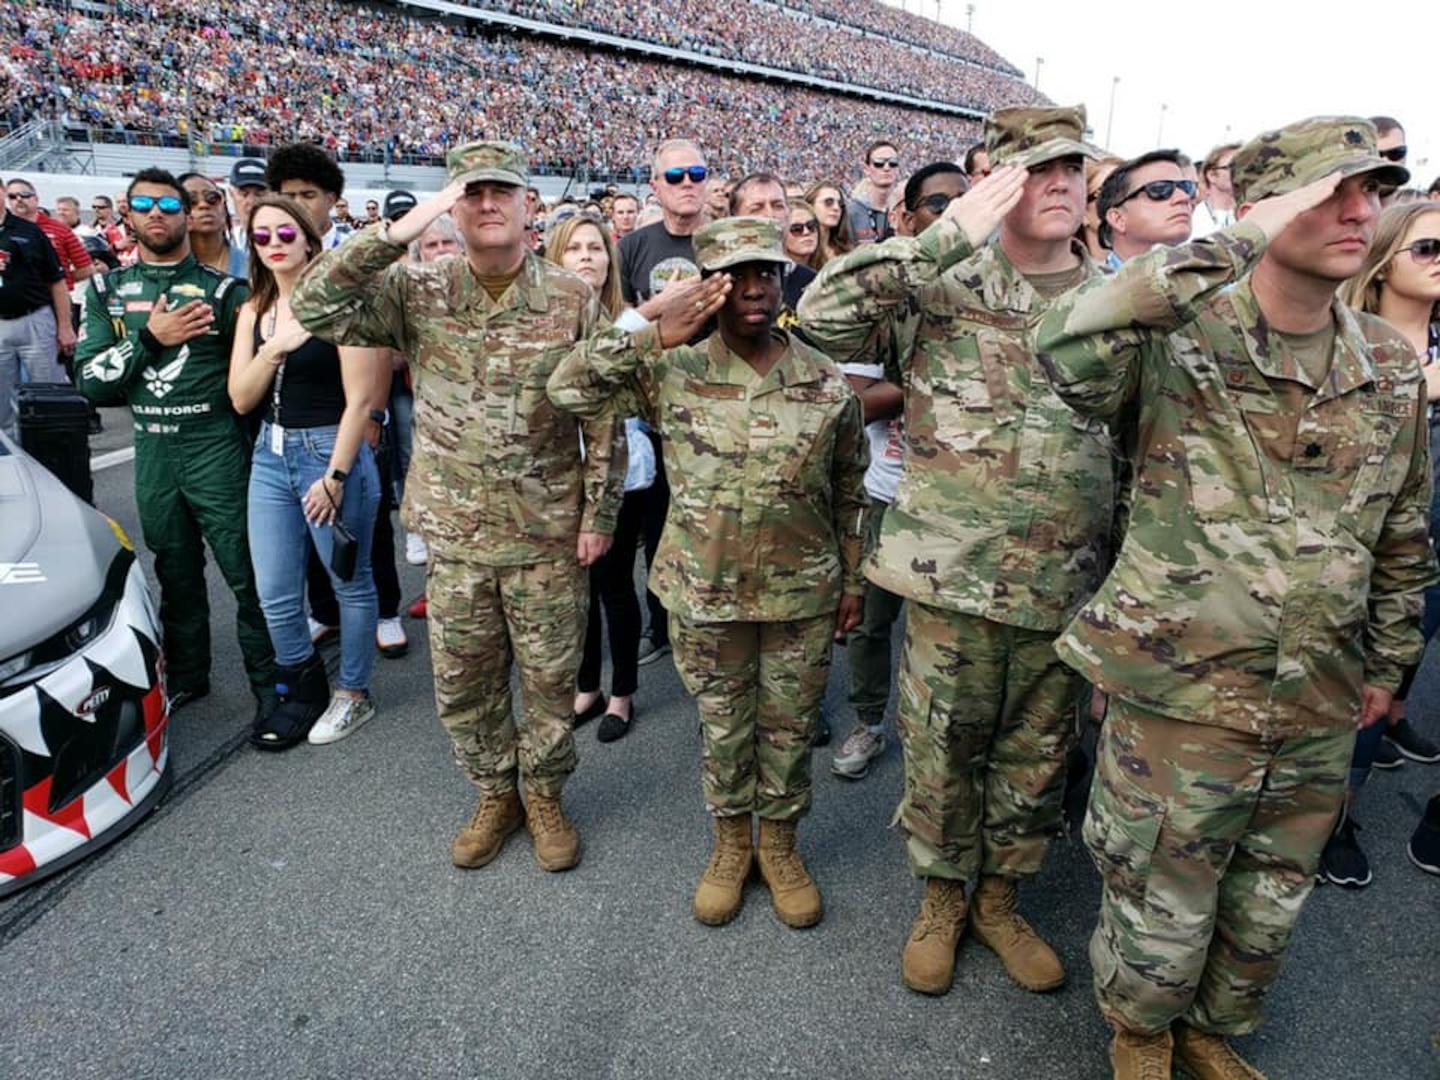 Military personnel saluting.